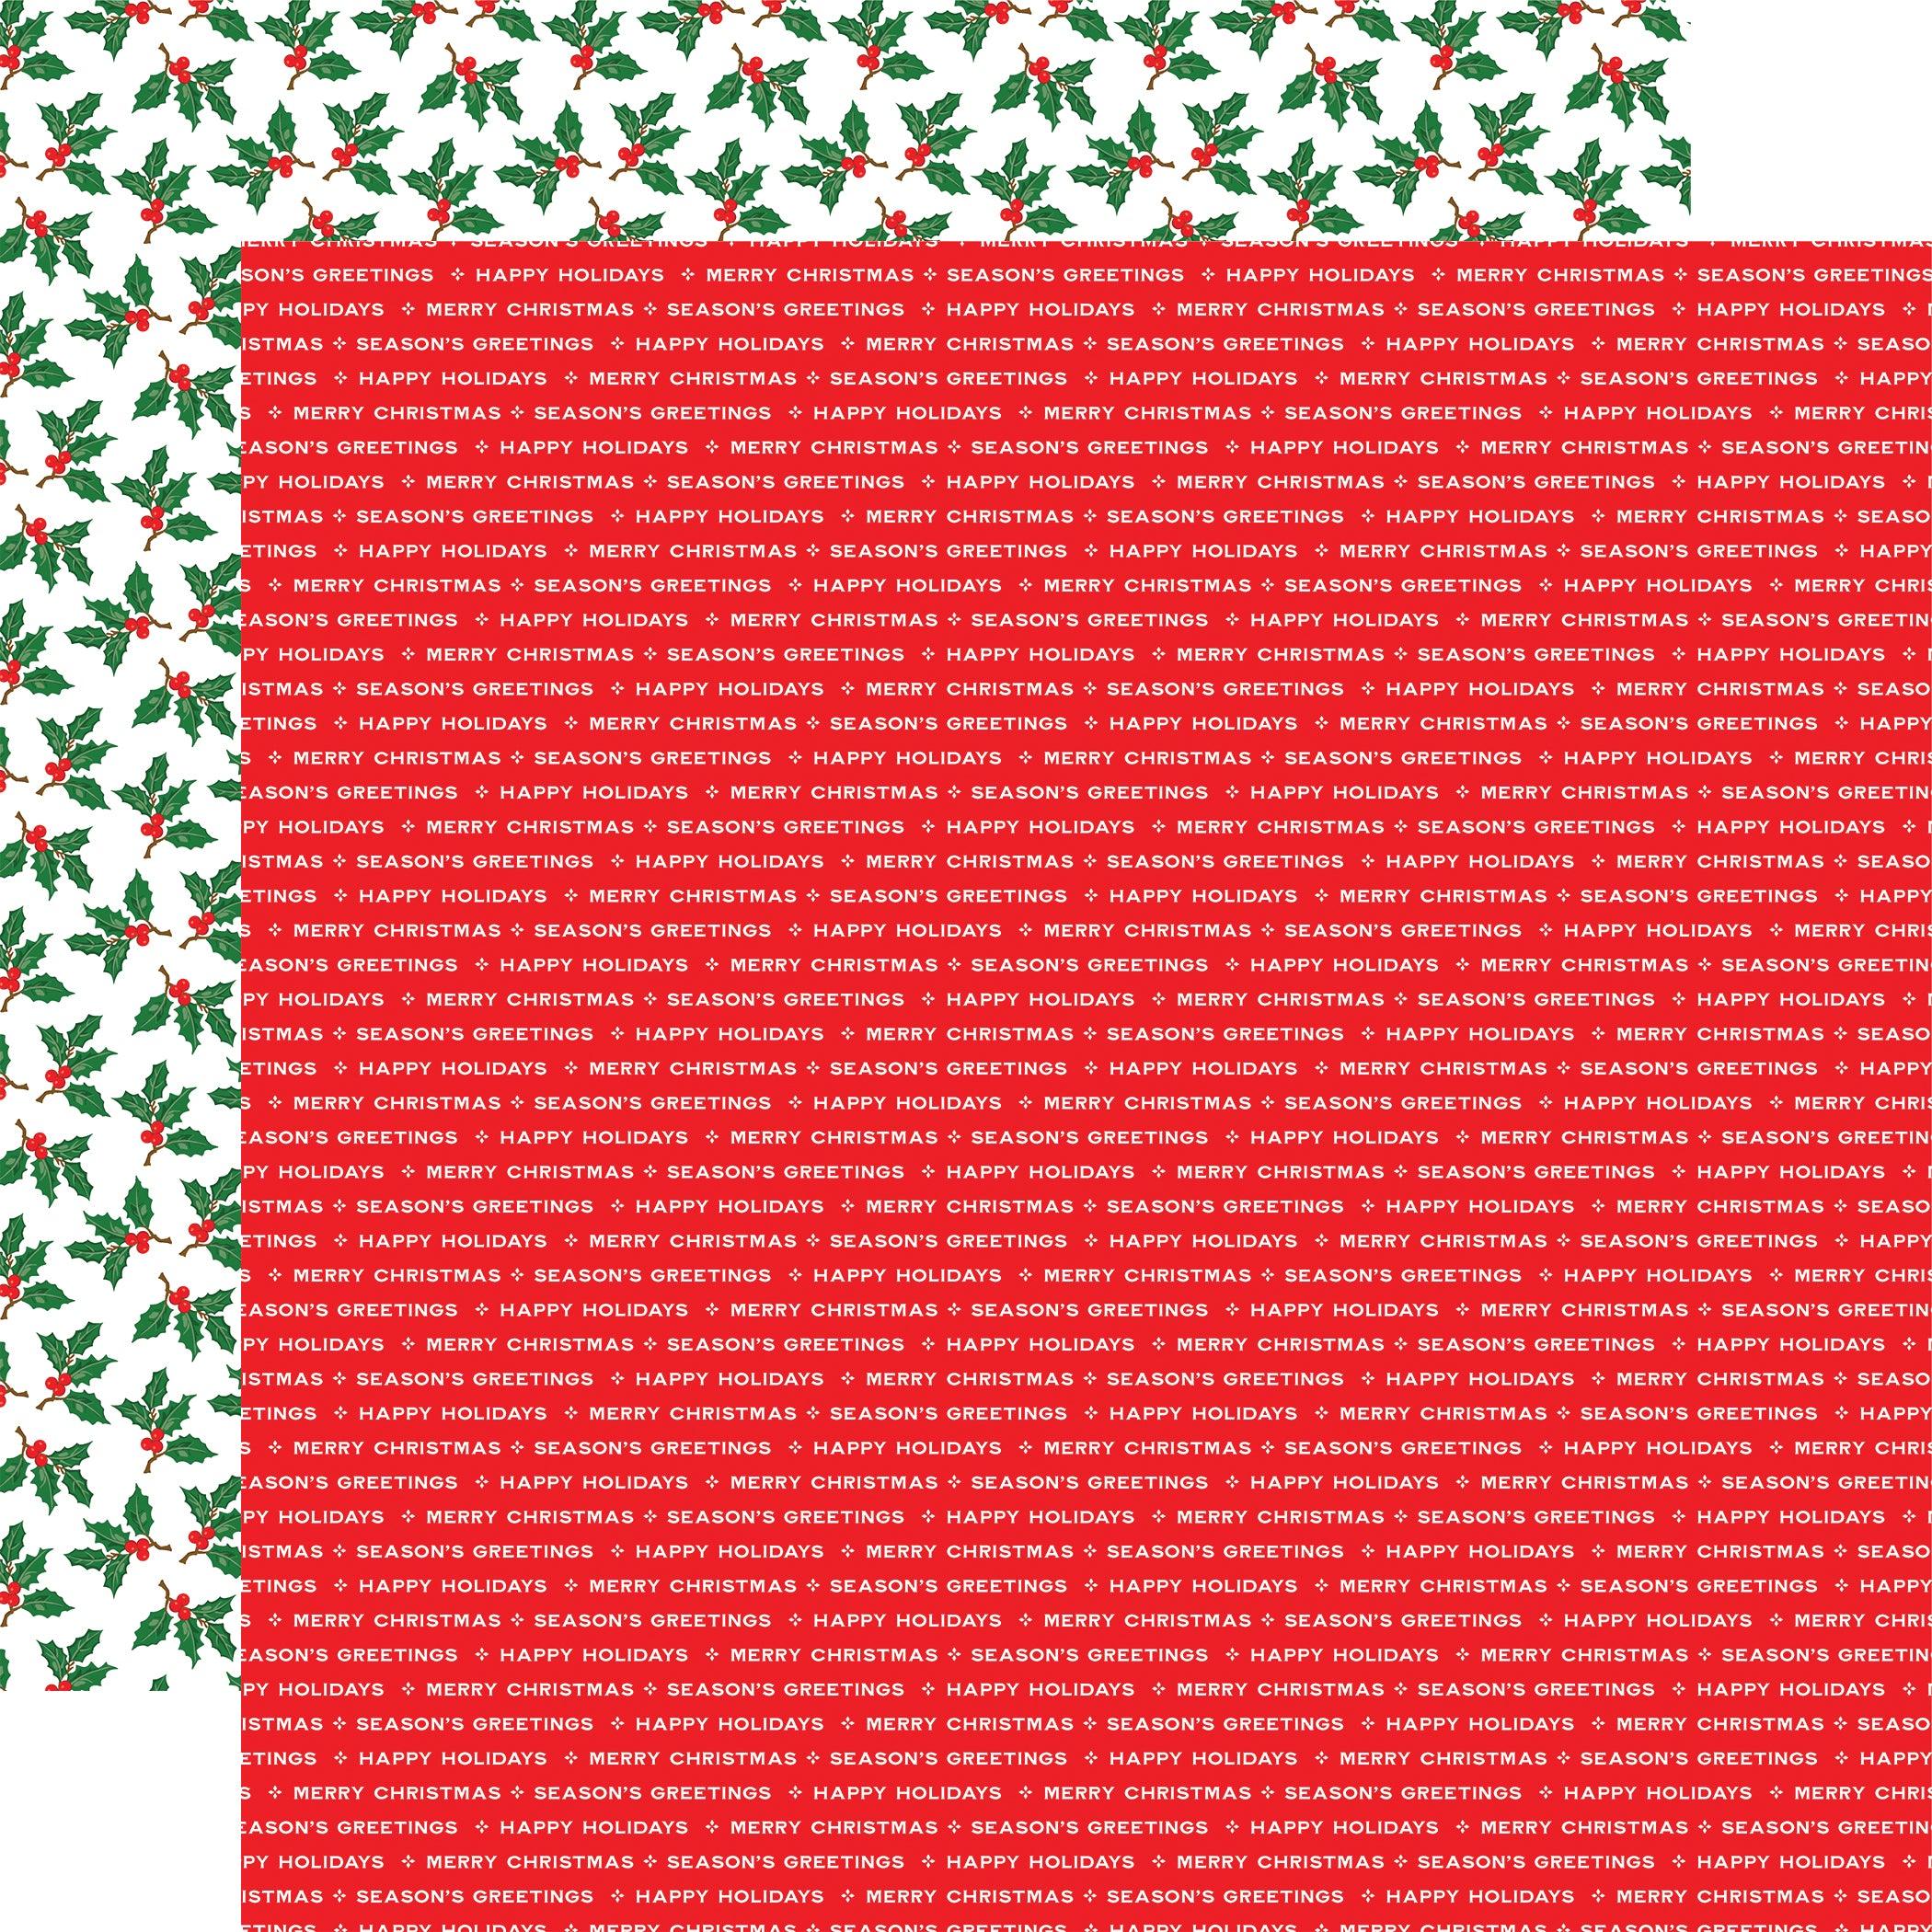 Christmas Cheer Collection 12 x 12 Double-Sided Scrapbook Paper Kit & Sticker Sheet by Carta Bella - 13 Pieces - Scrapbook Supply Companies